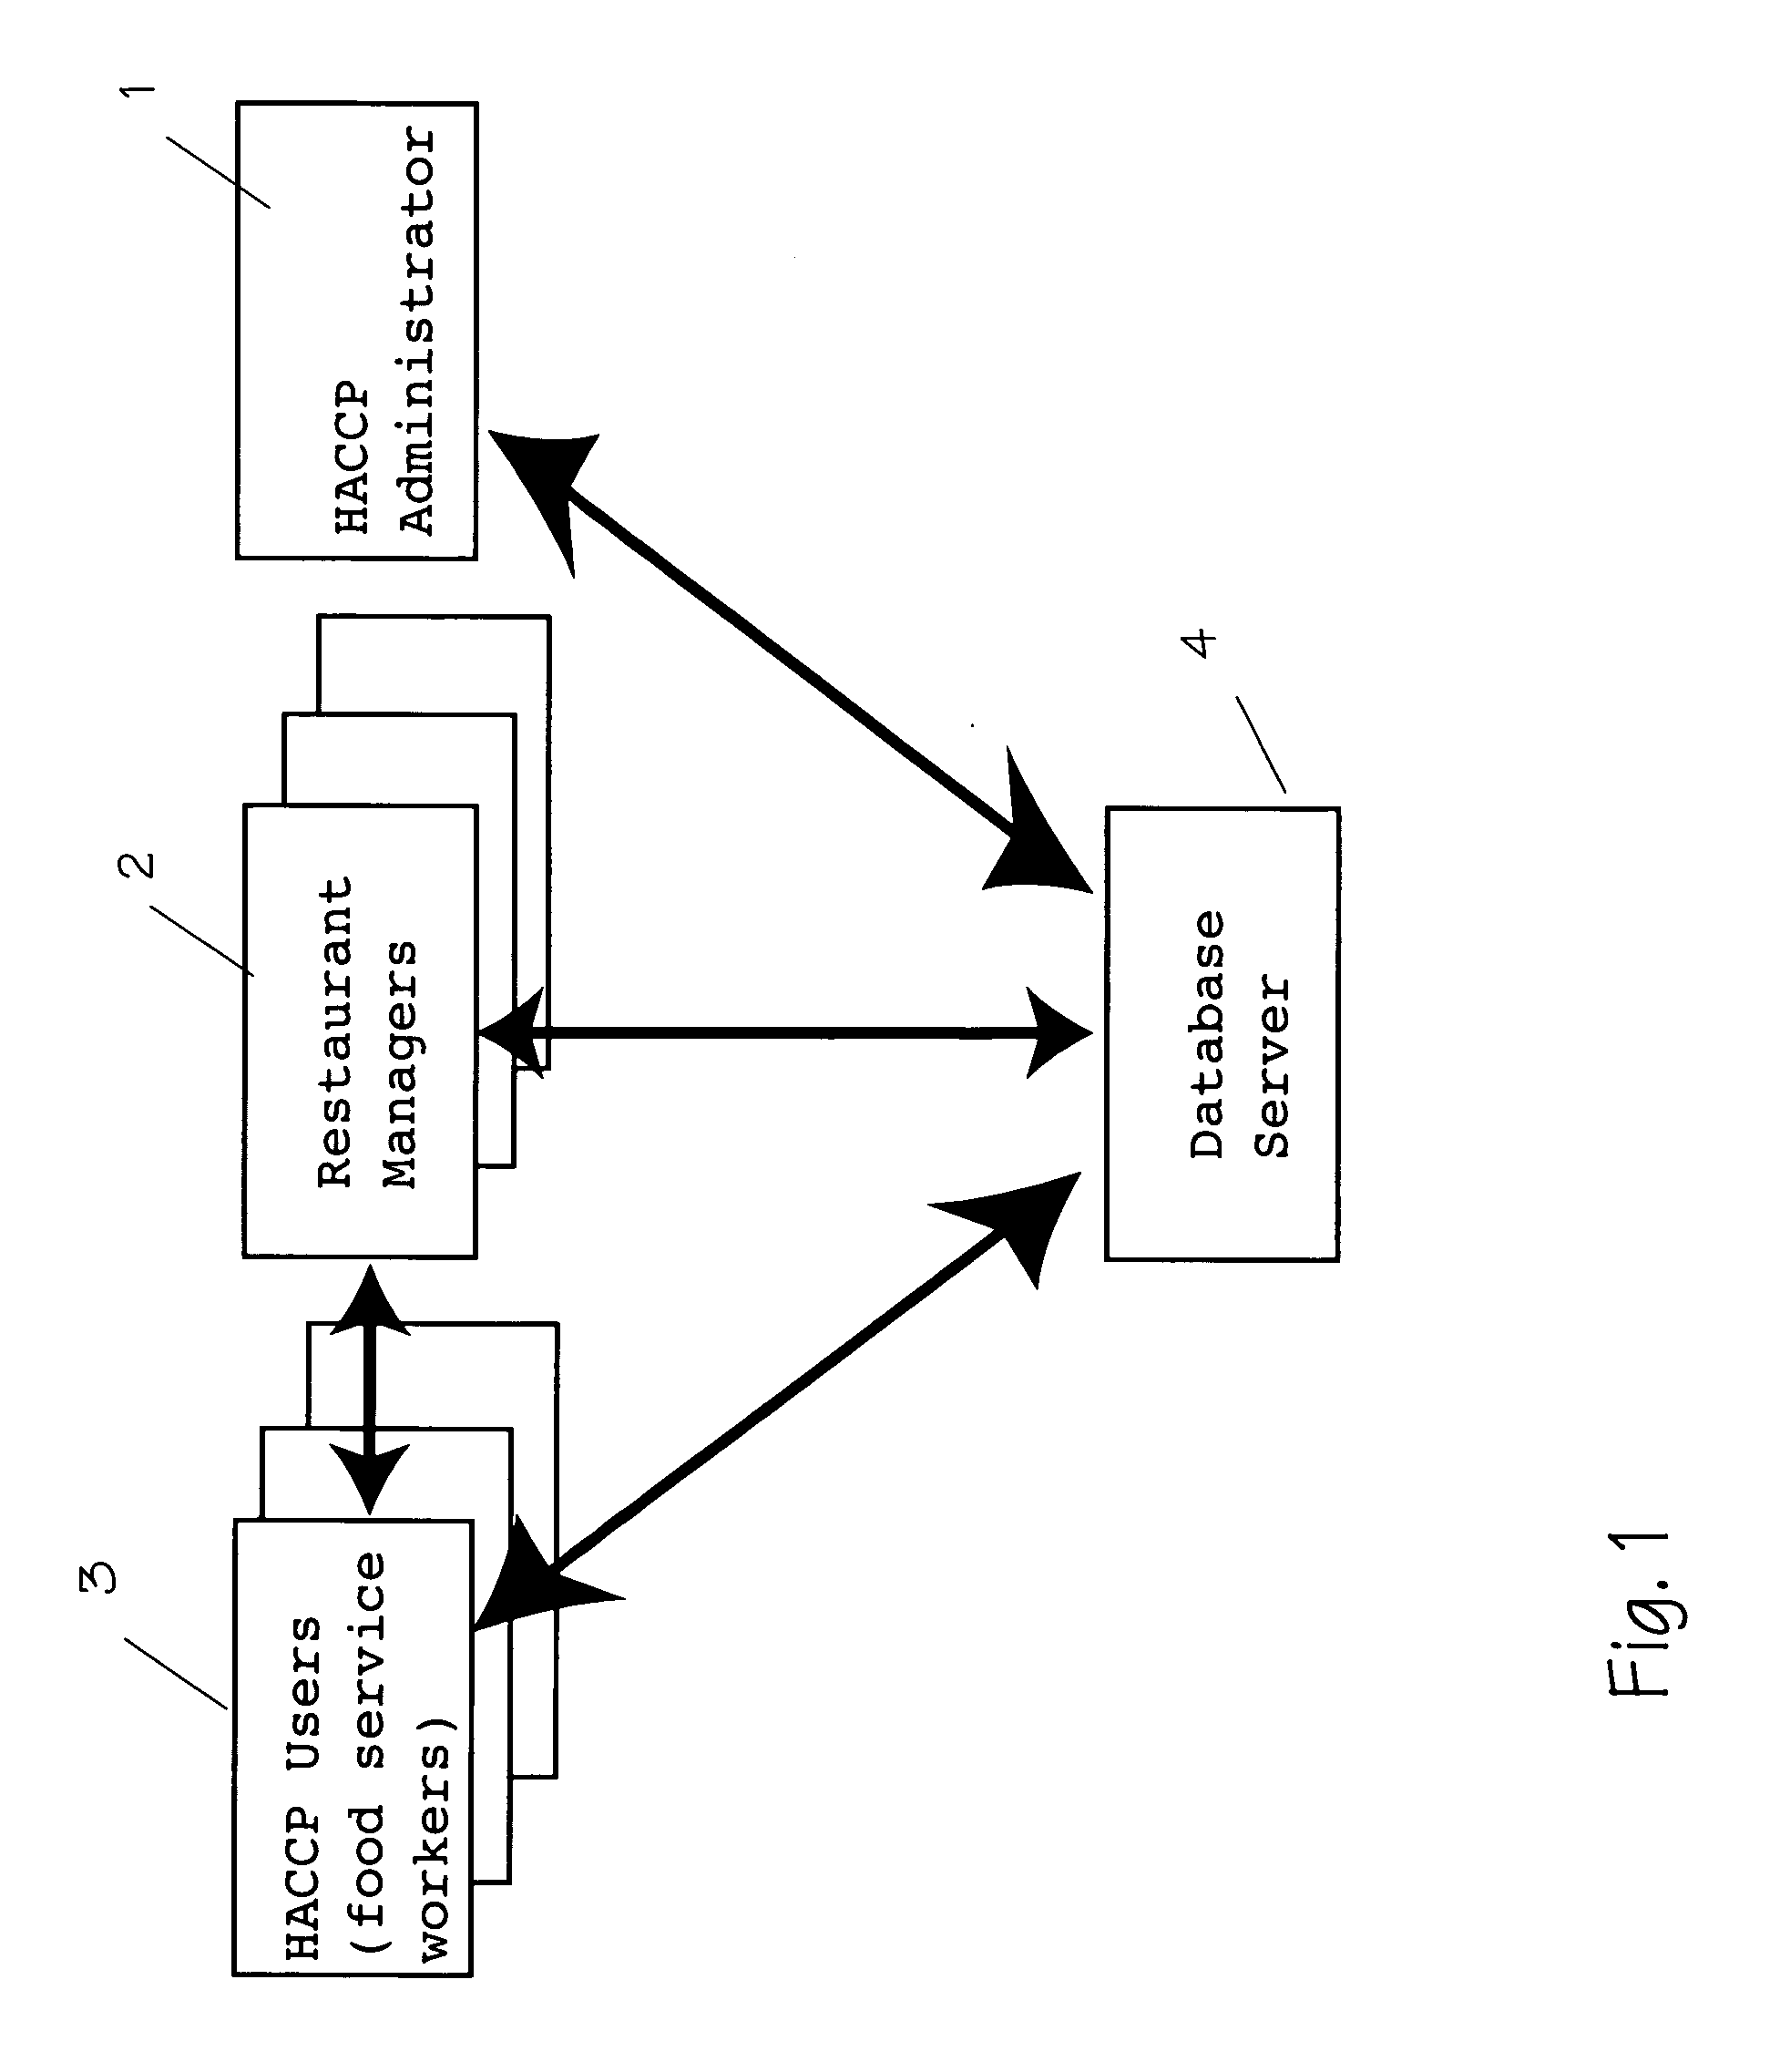 System and method for implementing HACCP process and control at a plurality of food service establishments via the internet